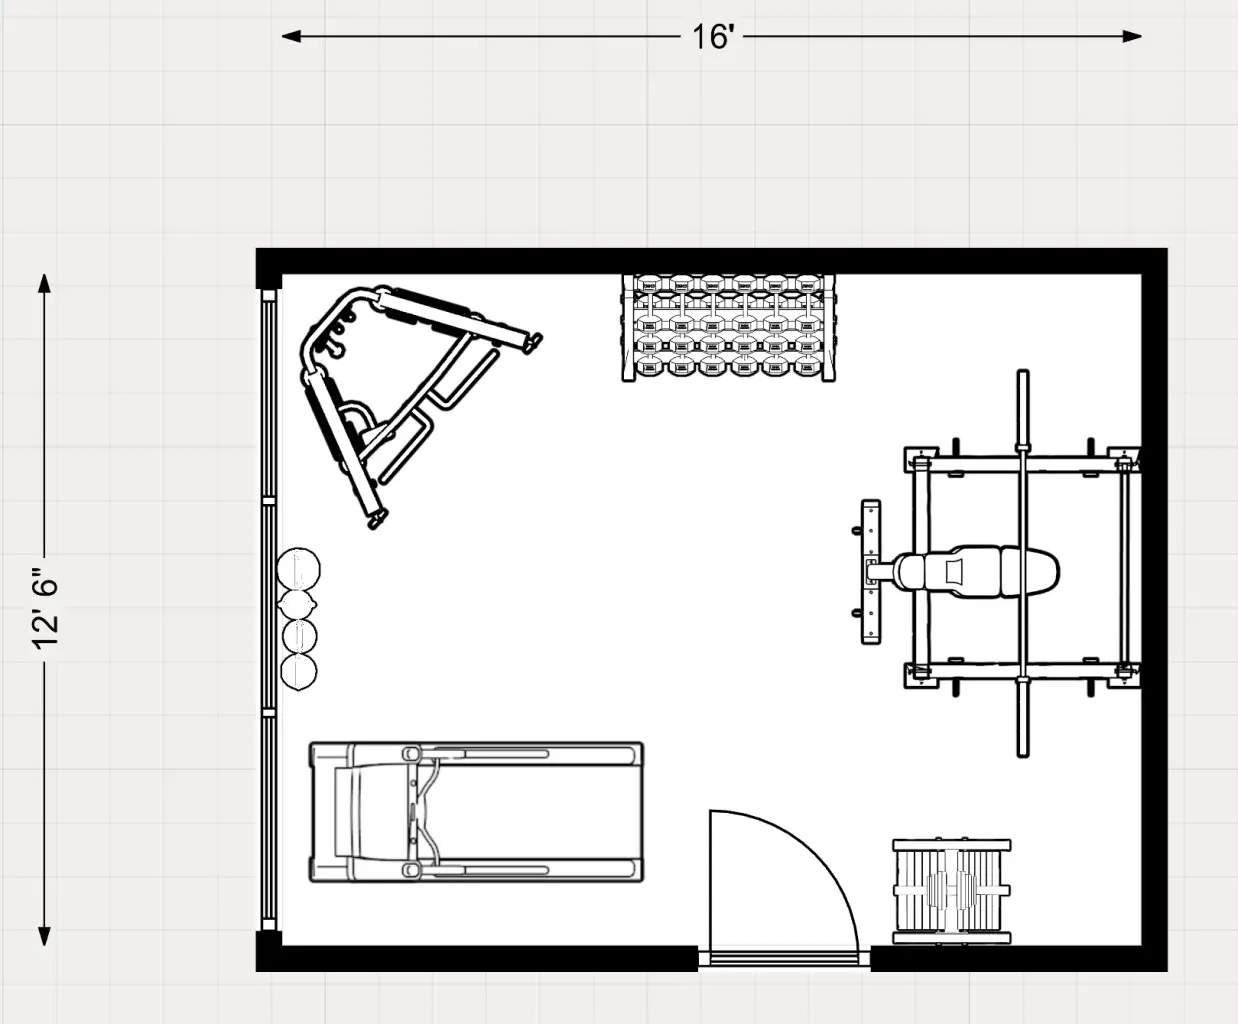 12' x 16' home gym floor plan 2d. 200 square foot. 